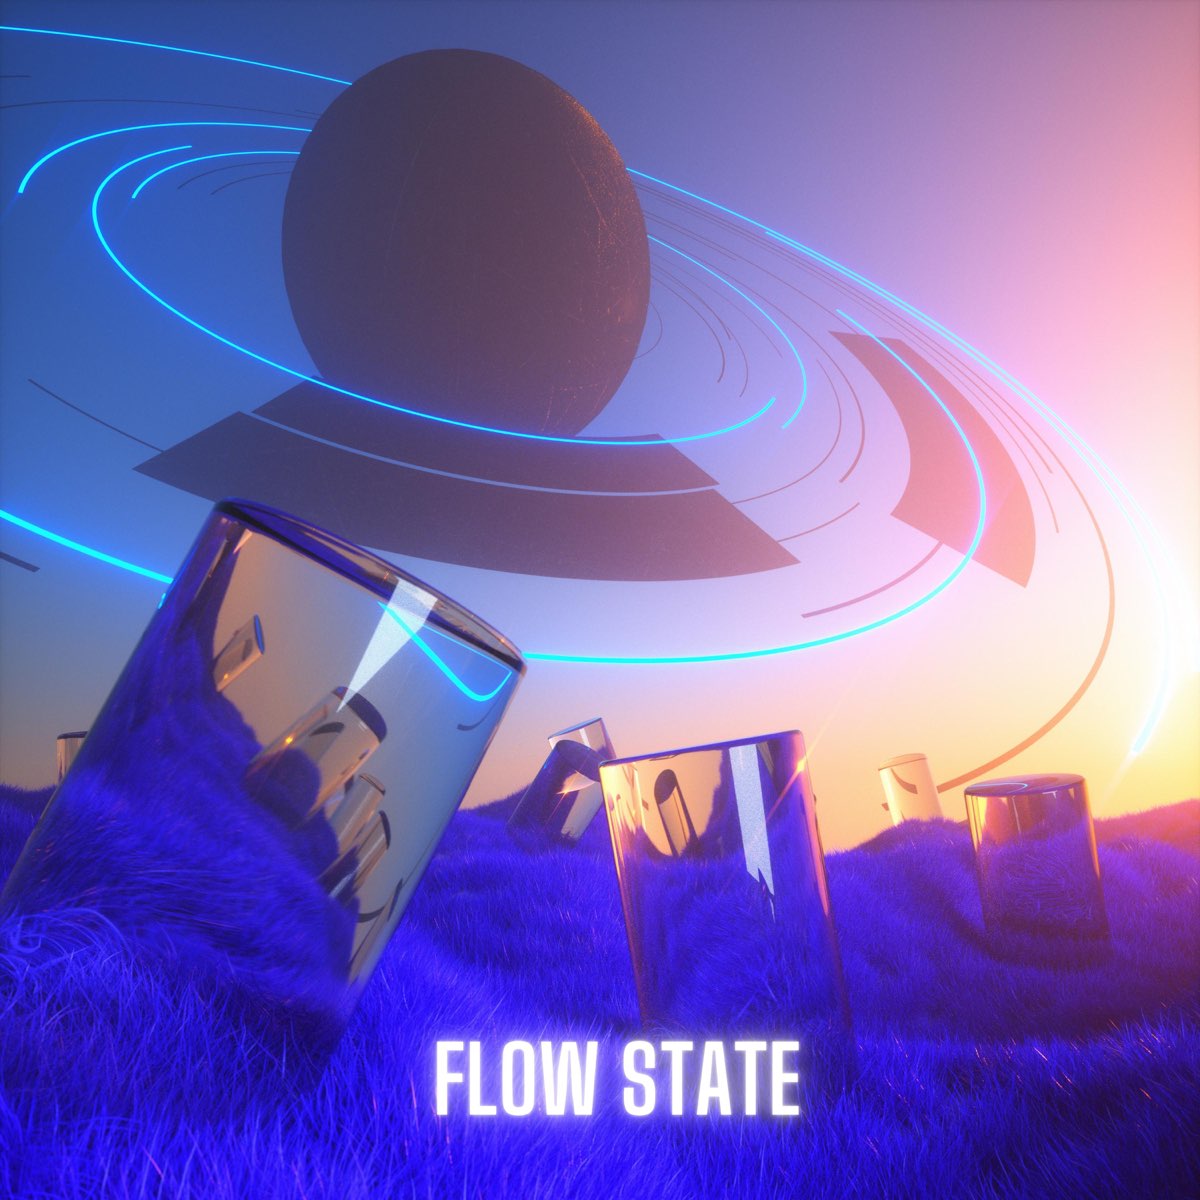 Flow state